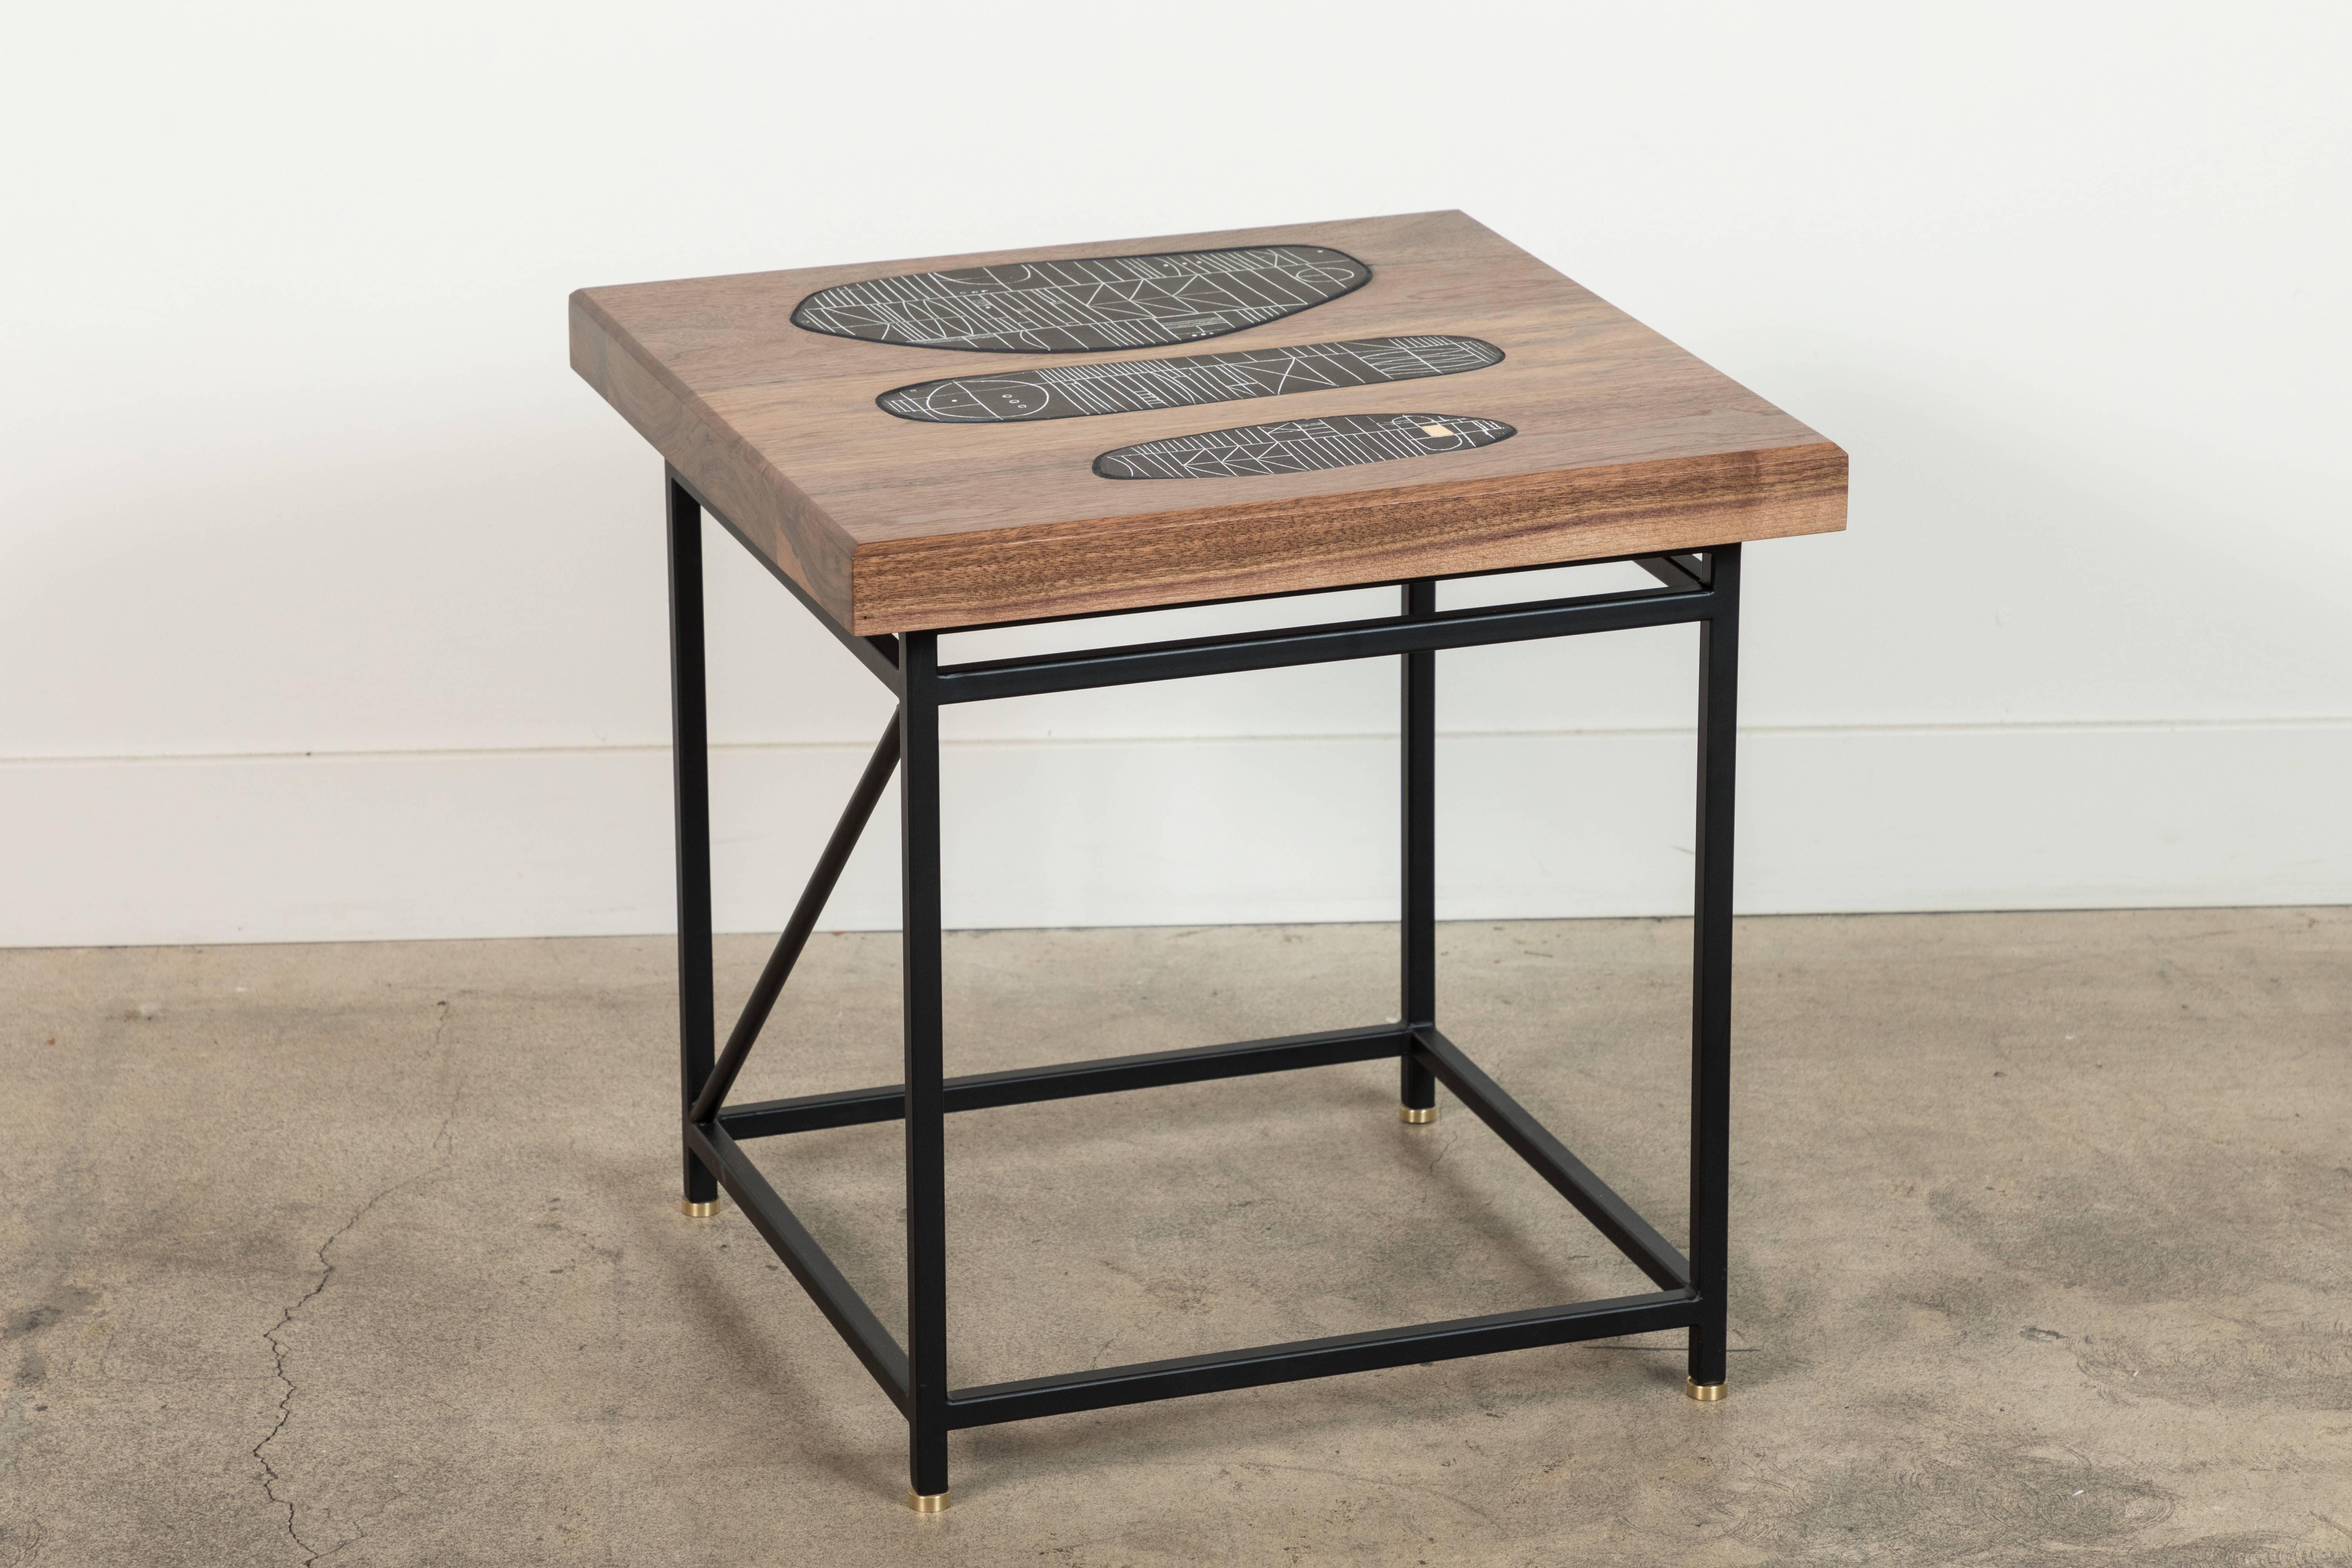 Mid-Century Modern Solid Walnut and Ceramic Side Table by Heather Rosenman for Collabs in Clay